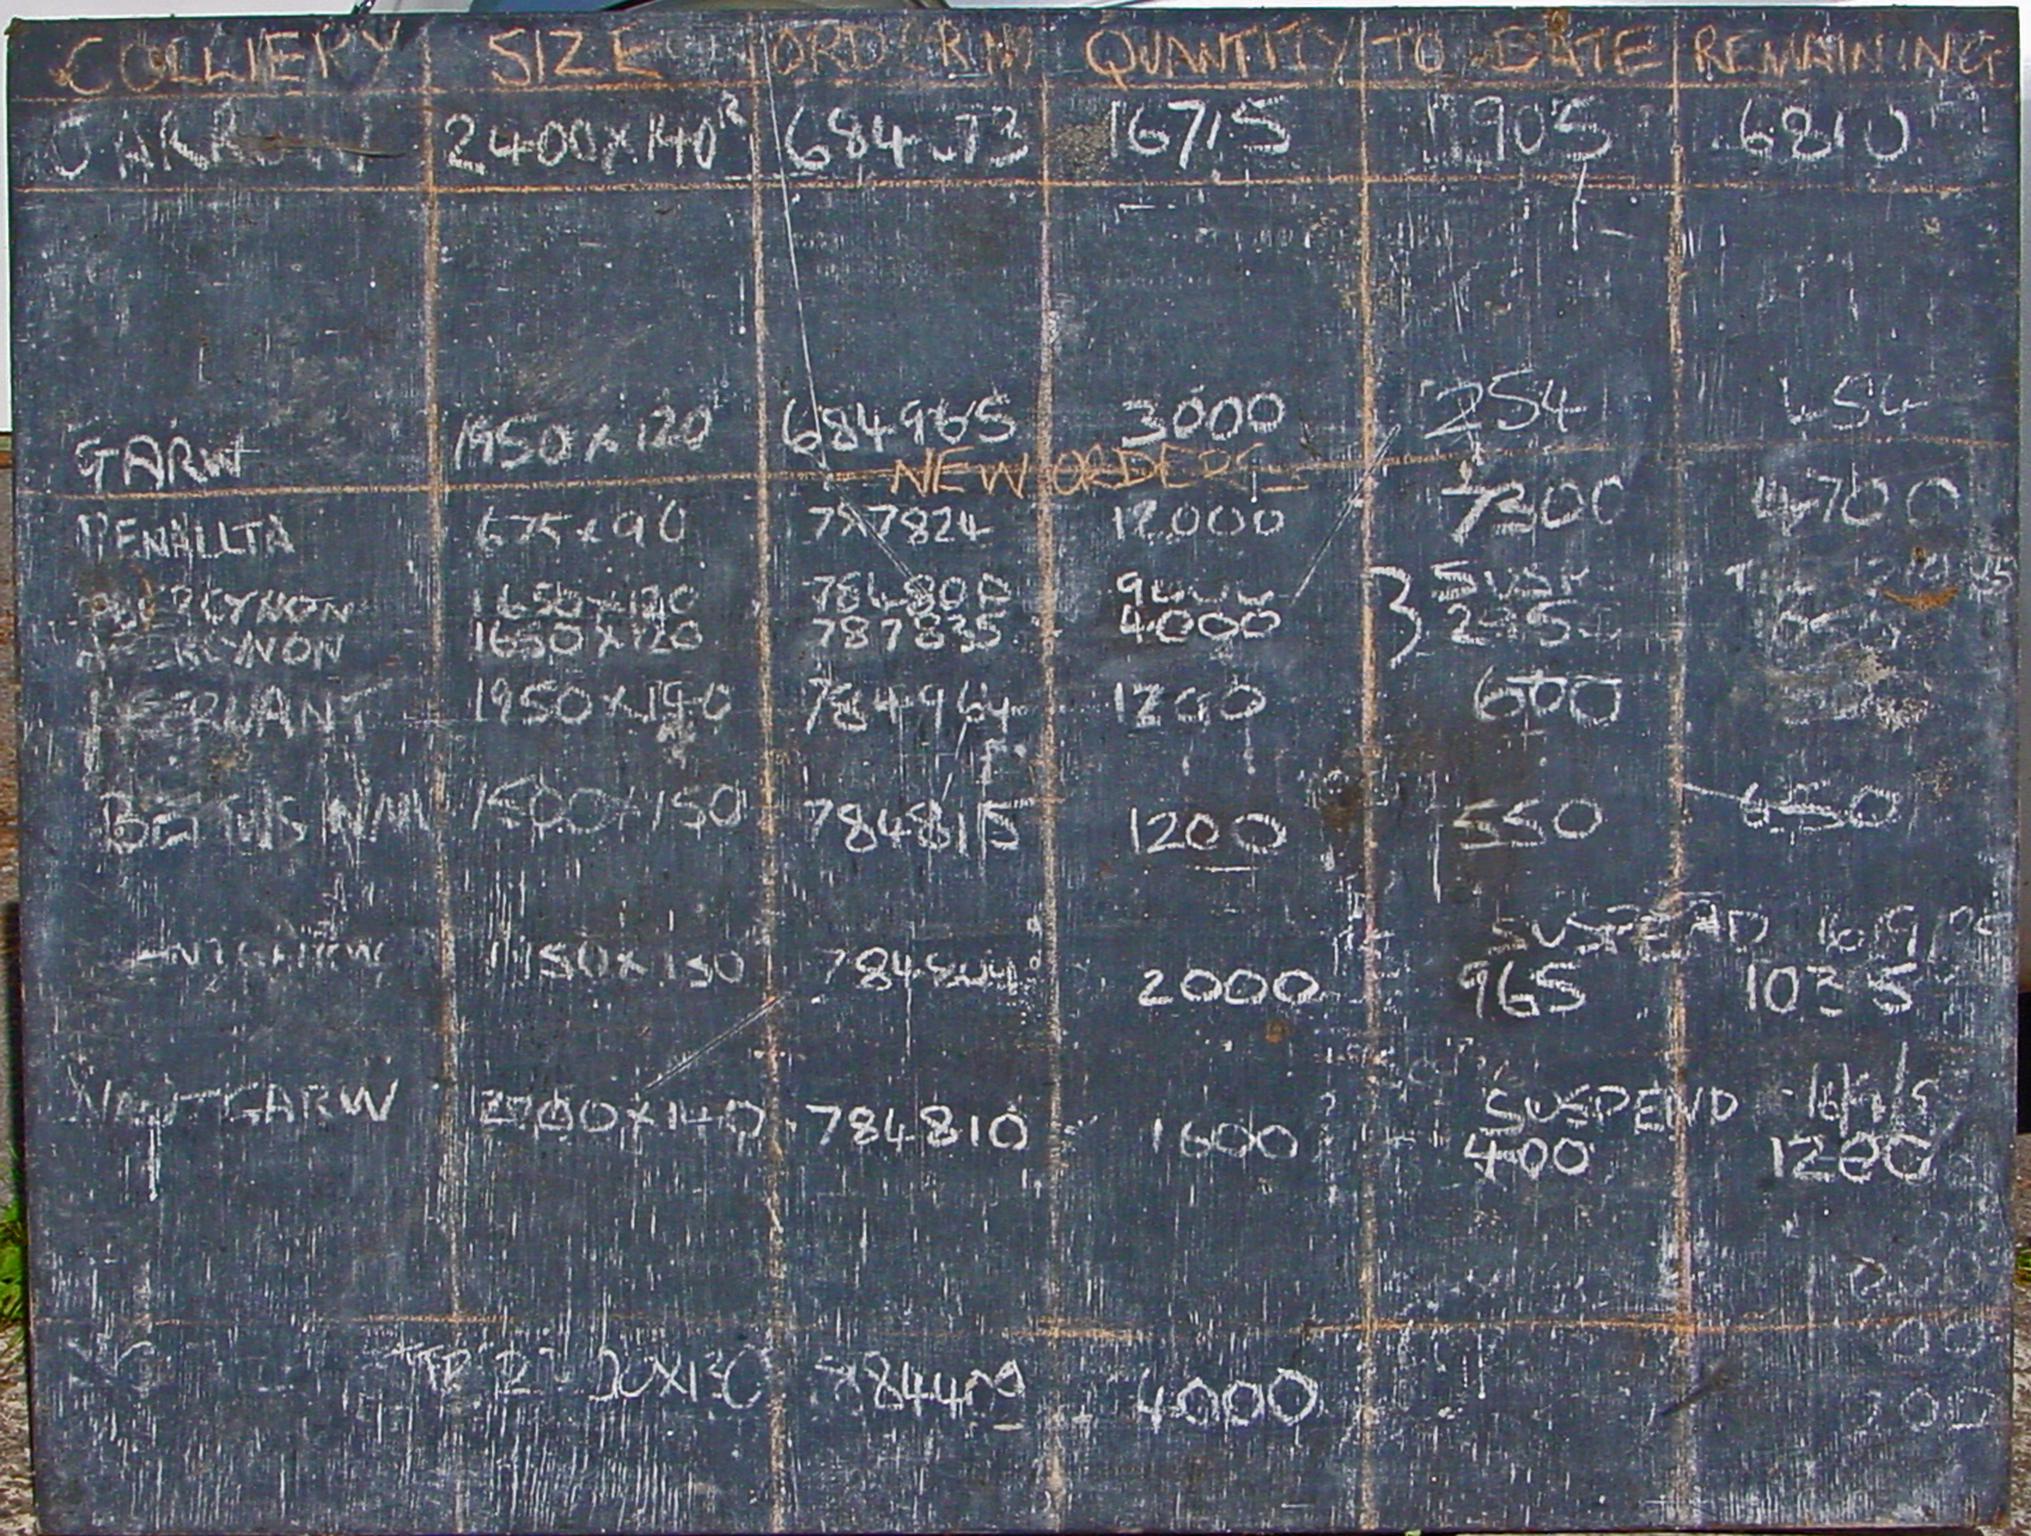 Chalk board listing mining timber orders, photograph